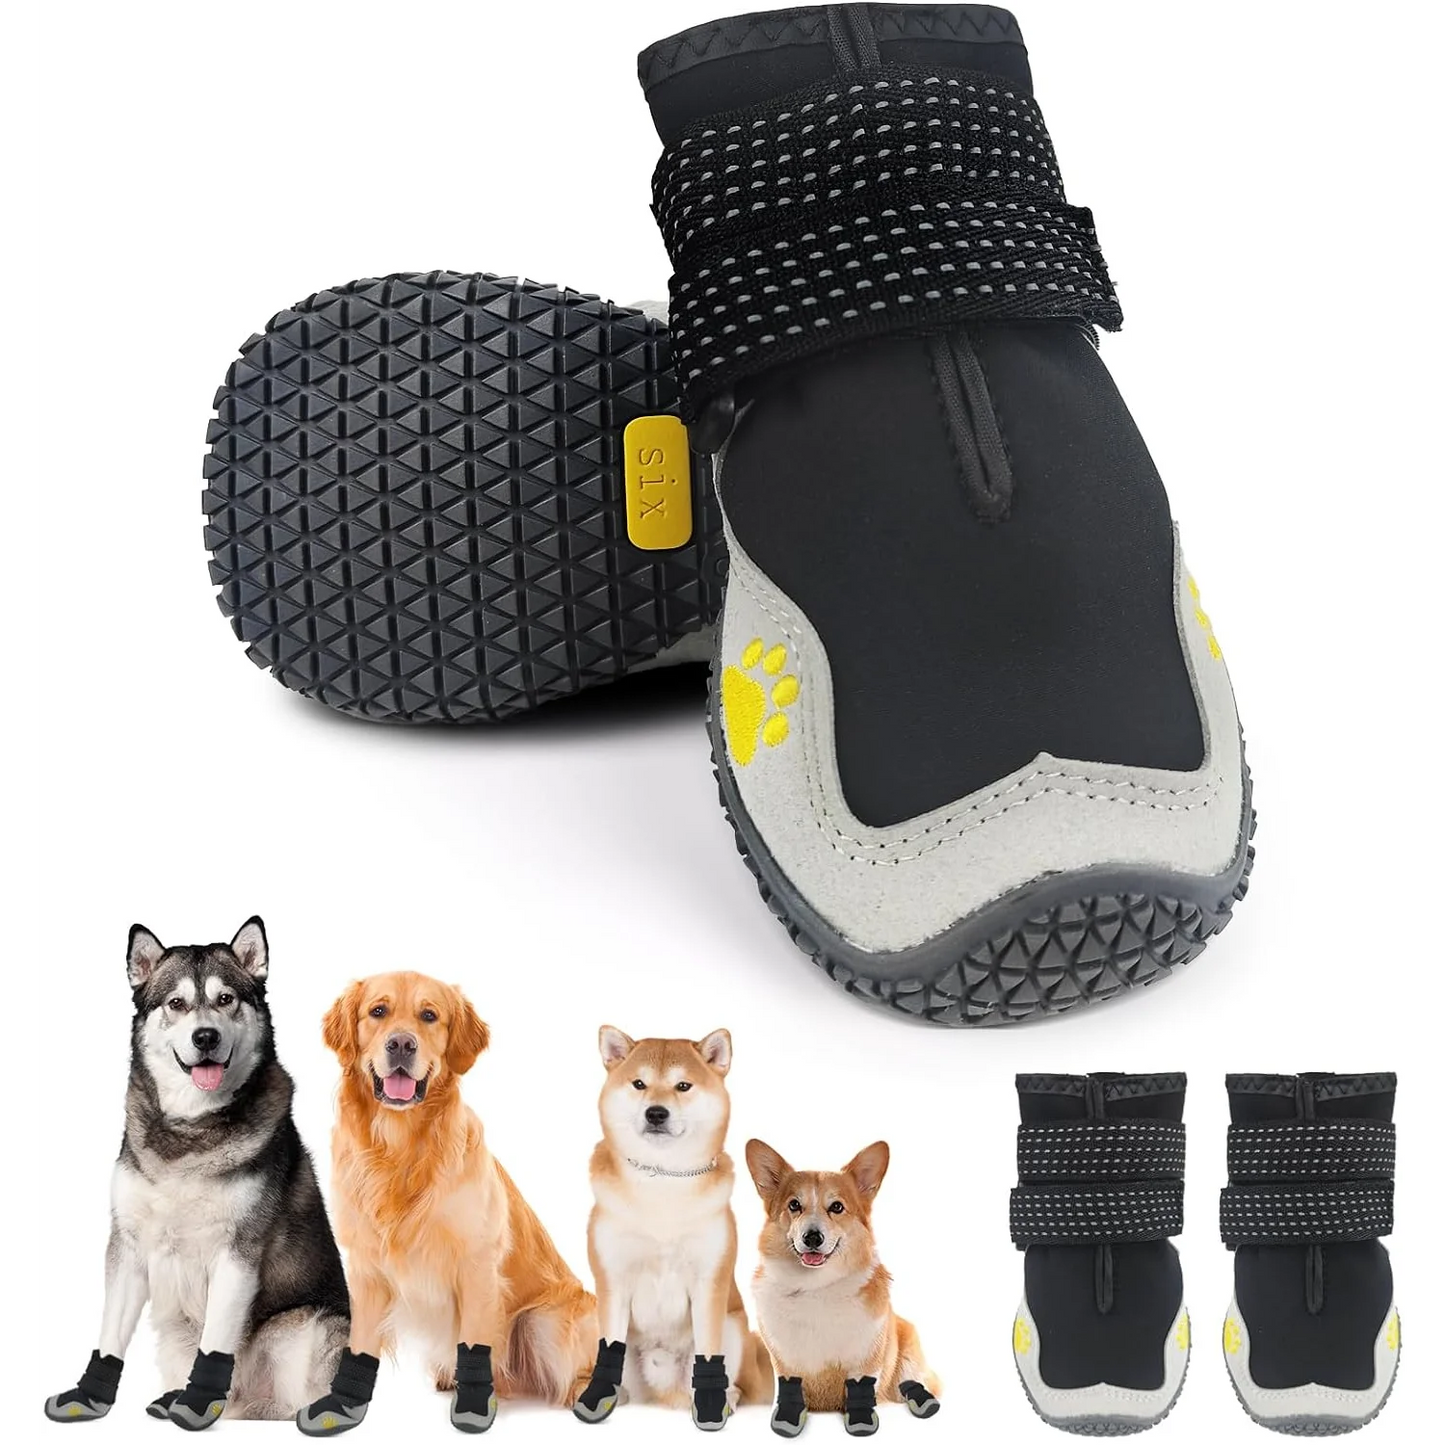 Paw Guard The Ultimate Protective Dog Shoes for Larger Dogs